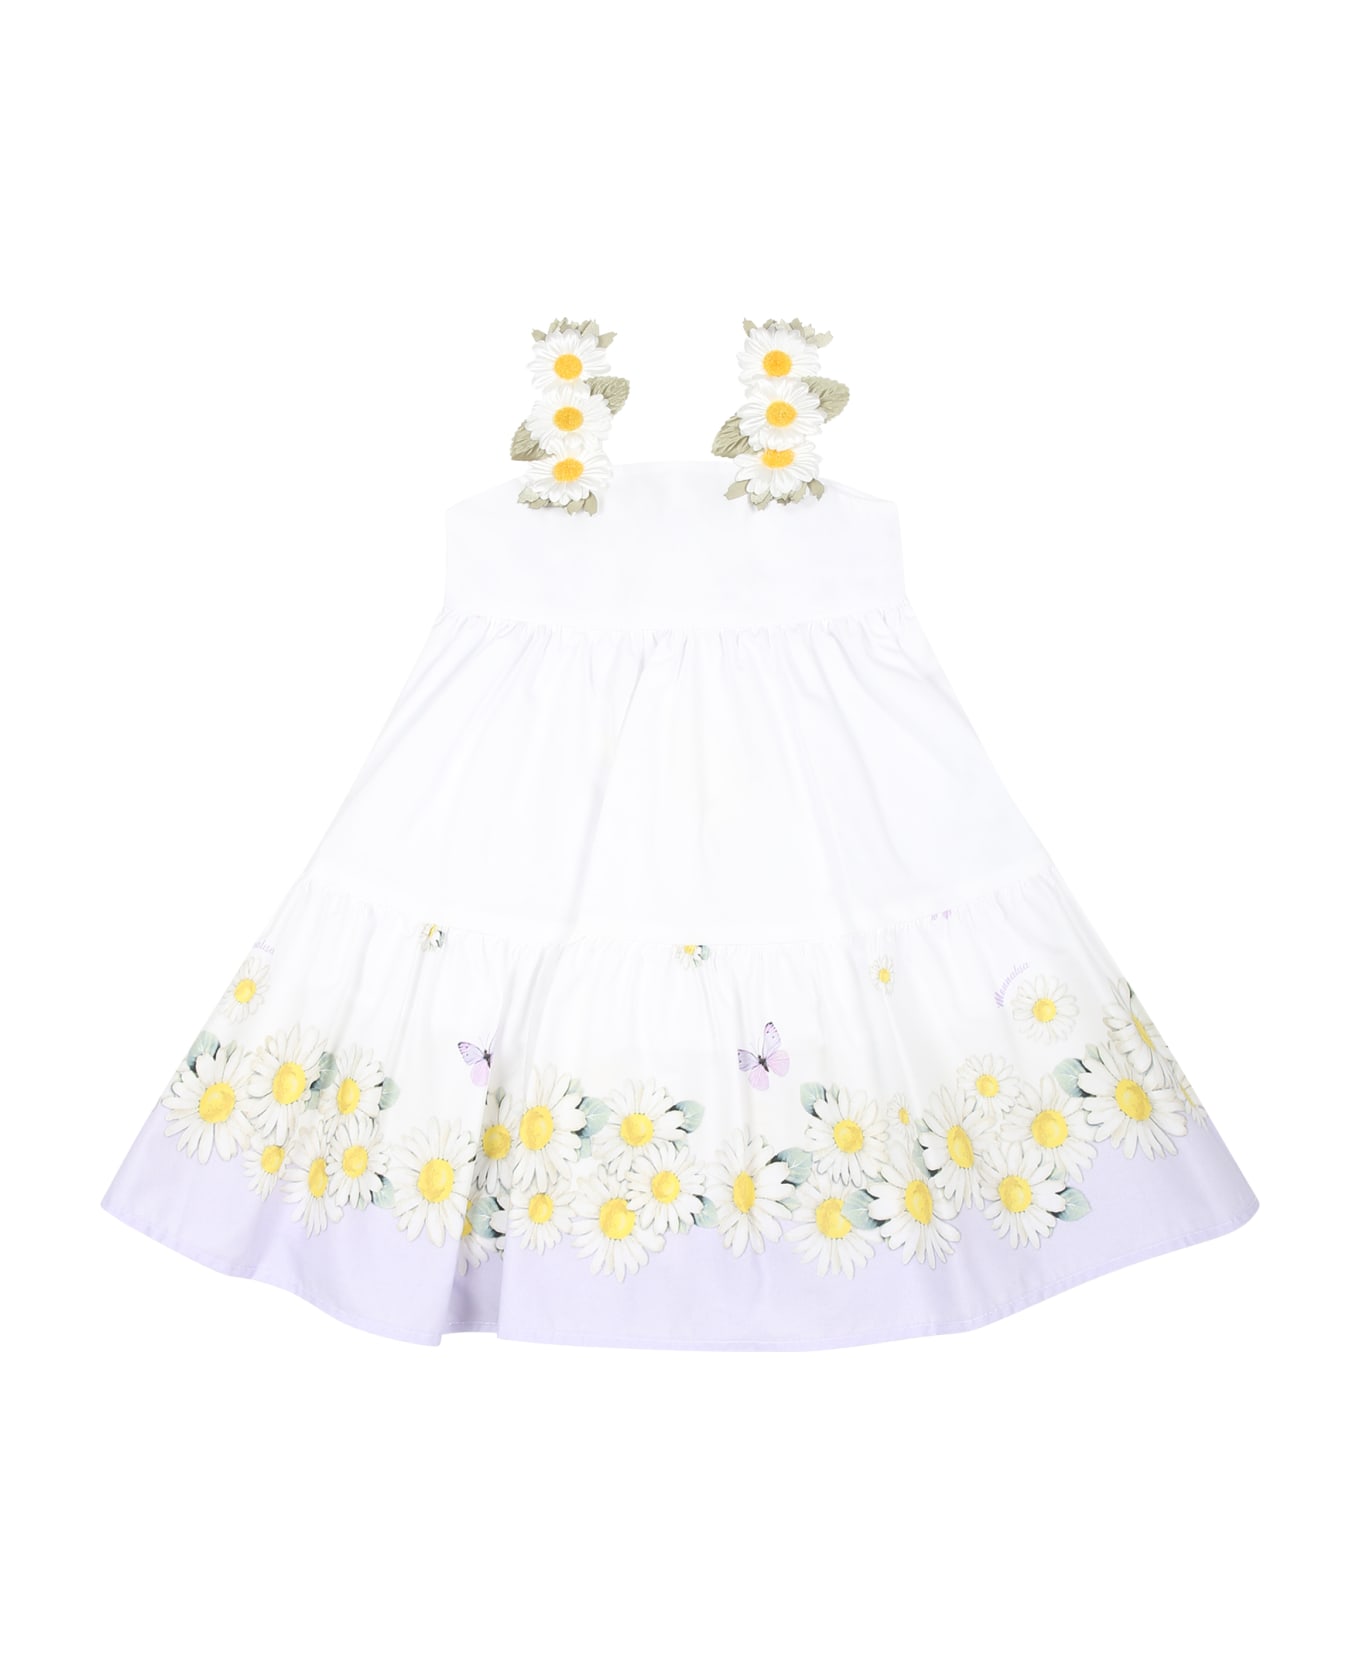 Monnalisa White Dress For Baby Girl With Daisies - White